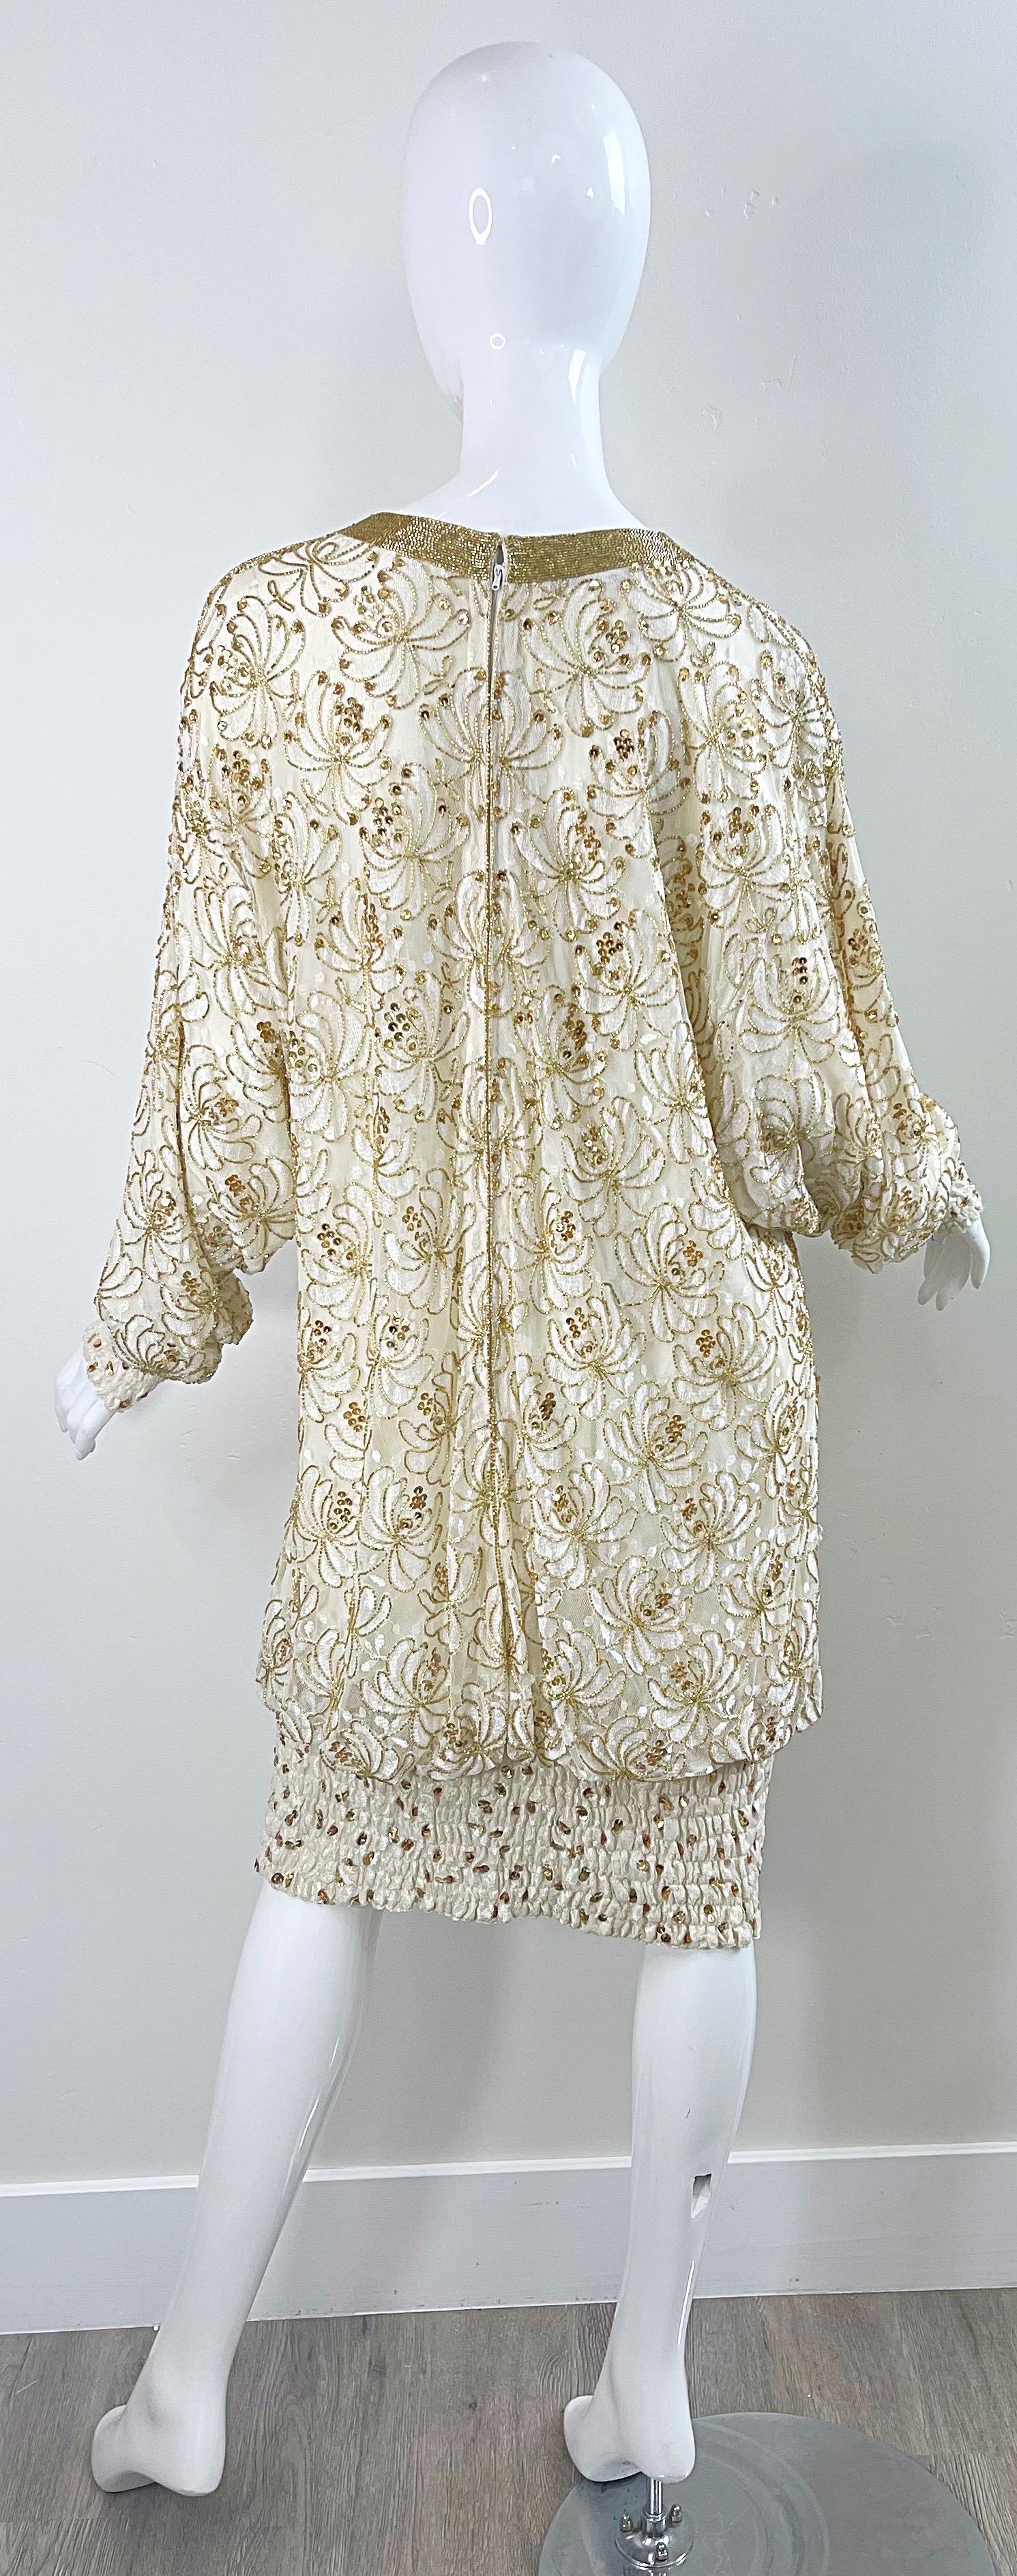 Lillie Rubin 1980s Ivory Off White + Gold Lace Sequin Beaded Vintage 80s Dress For Sale 9